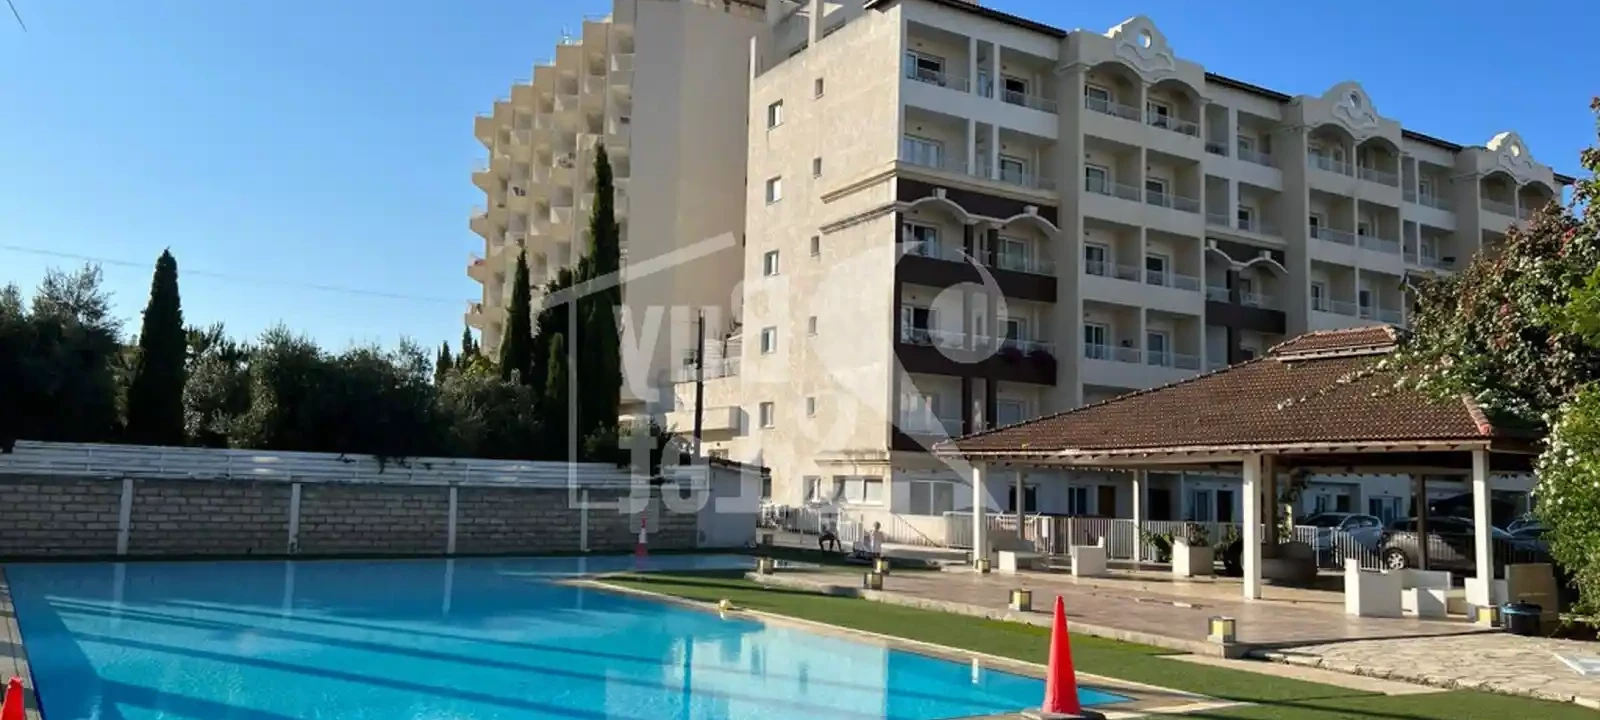 1-bedroom apartment fоr sаle €250.000, image 1